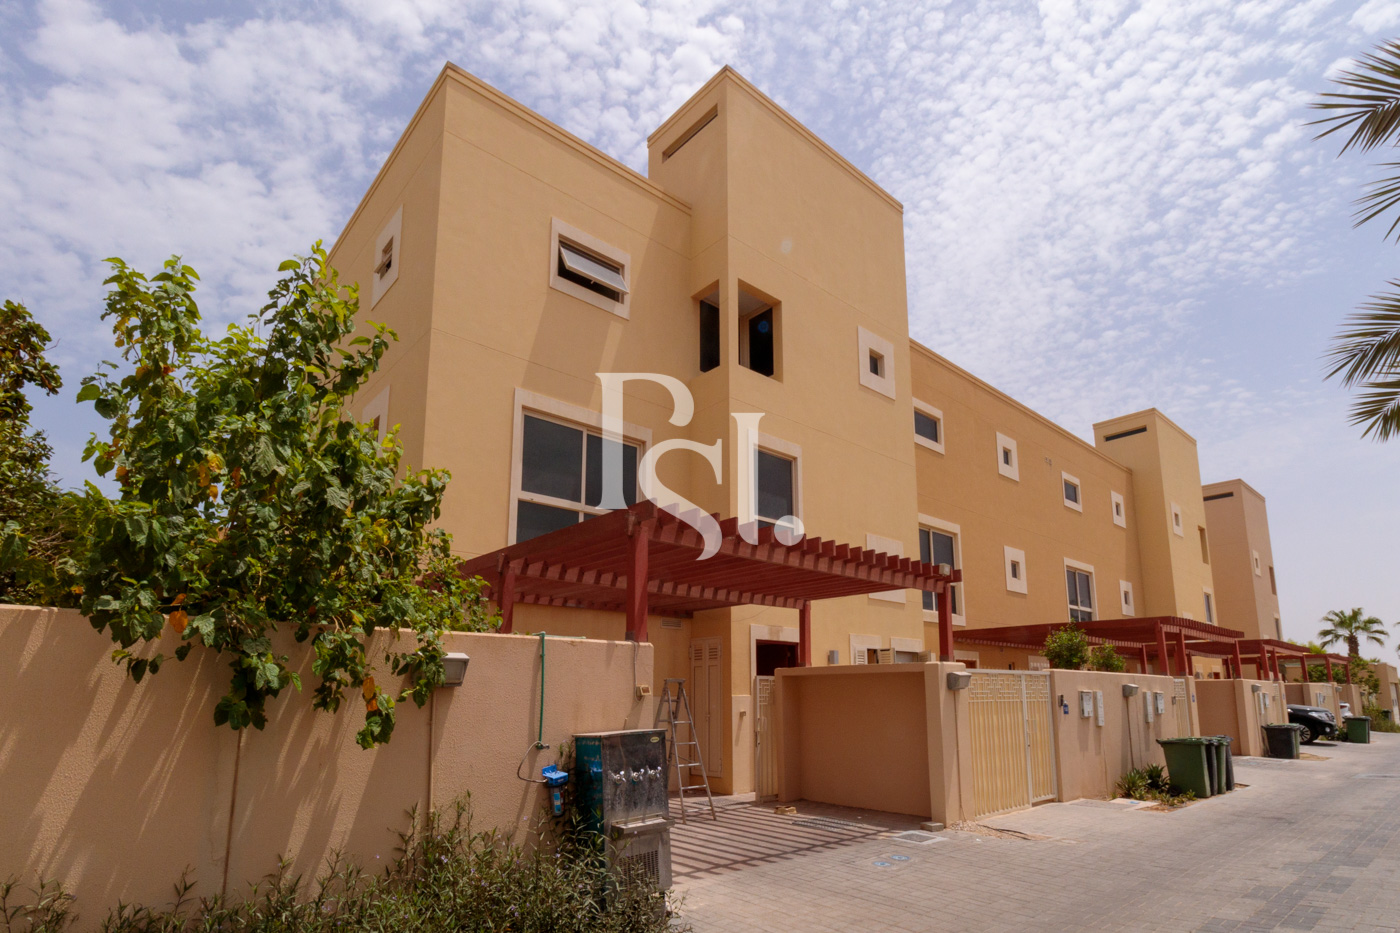 Hot Price 4 BR Townhouse (A) w/ Maid’s and Study Room, Terrace, Lawn for Sale in Hemaim